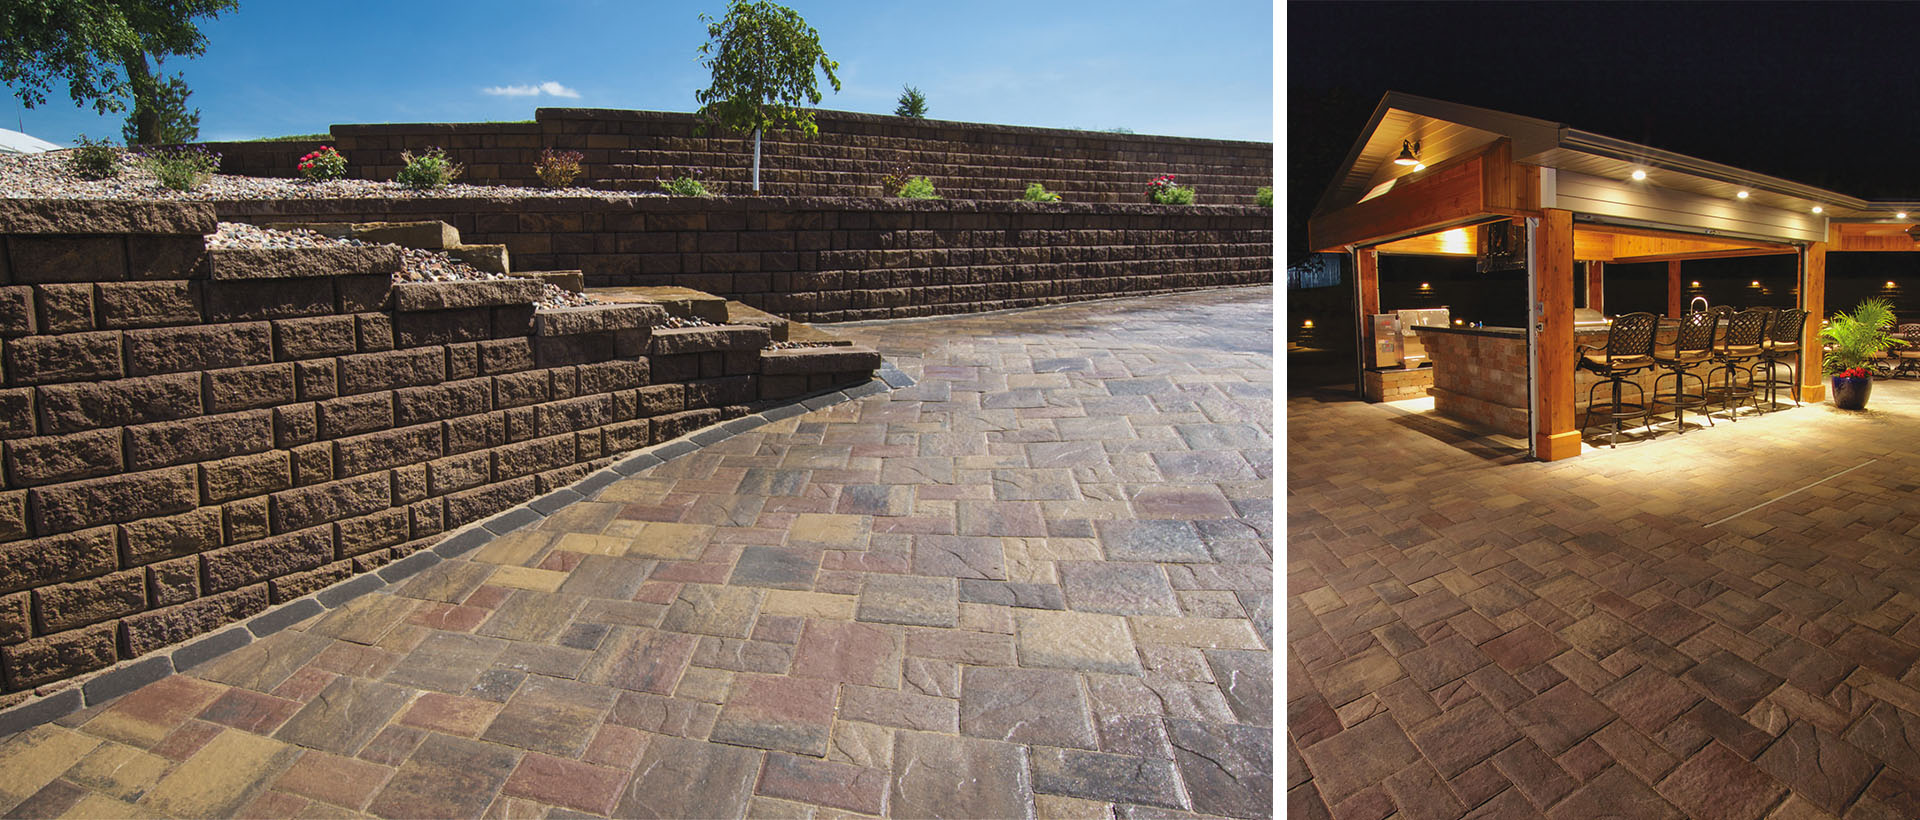 Mezzano is the smaller version of our Minnetonka paver. Its embossed tops and chamfered/irregular edge details are designed for use on patios, pathways, pool decks or vehicular applications.